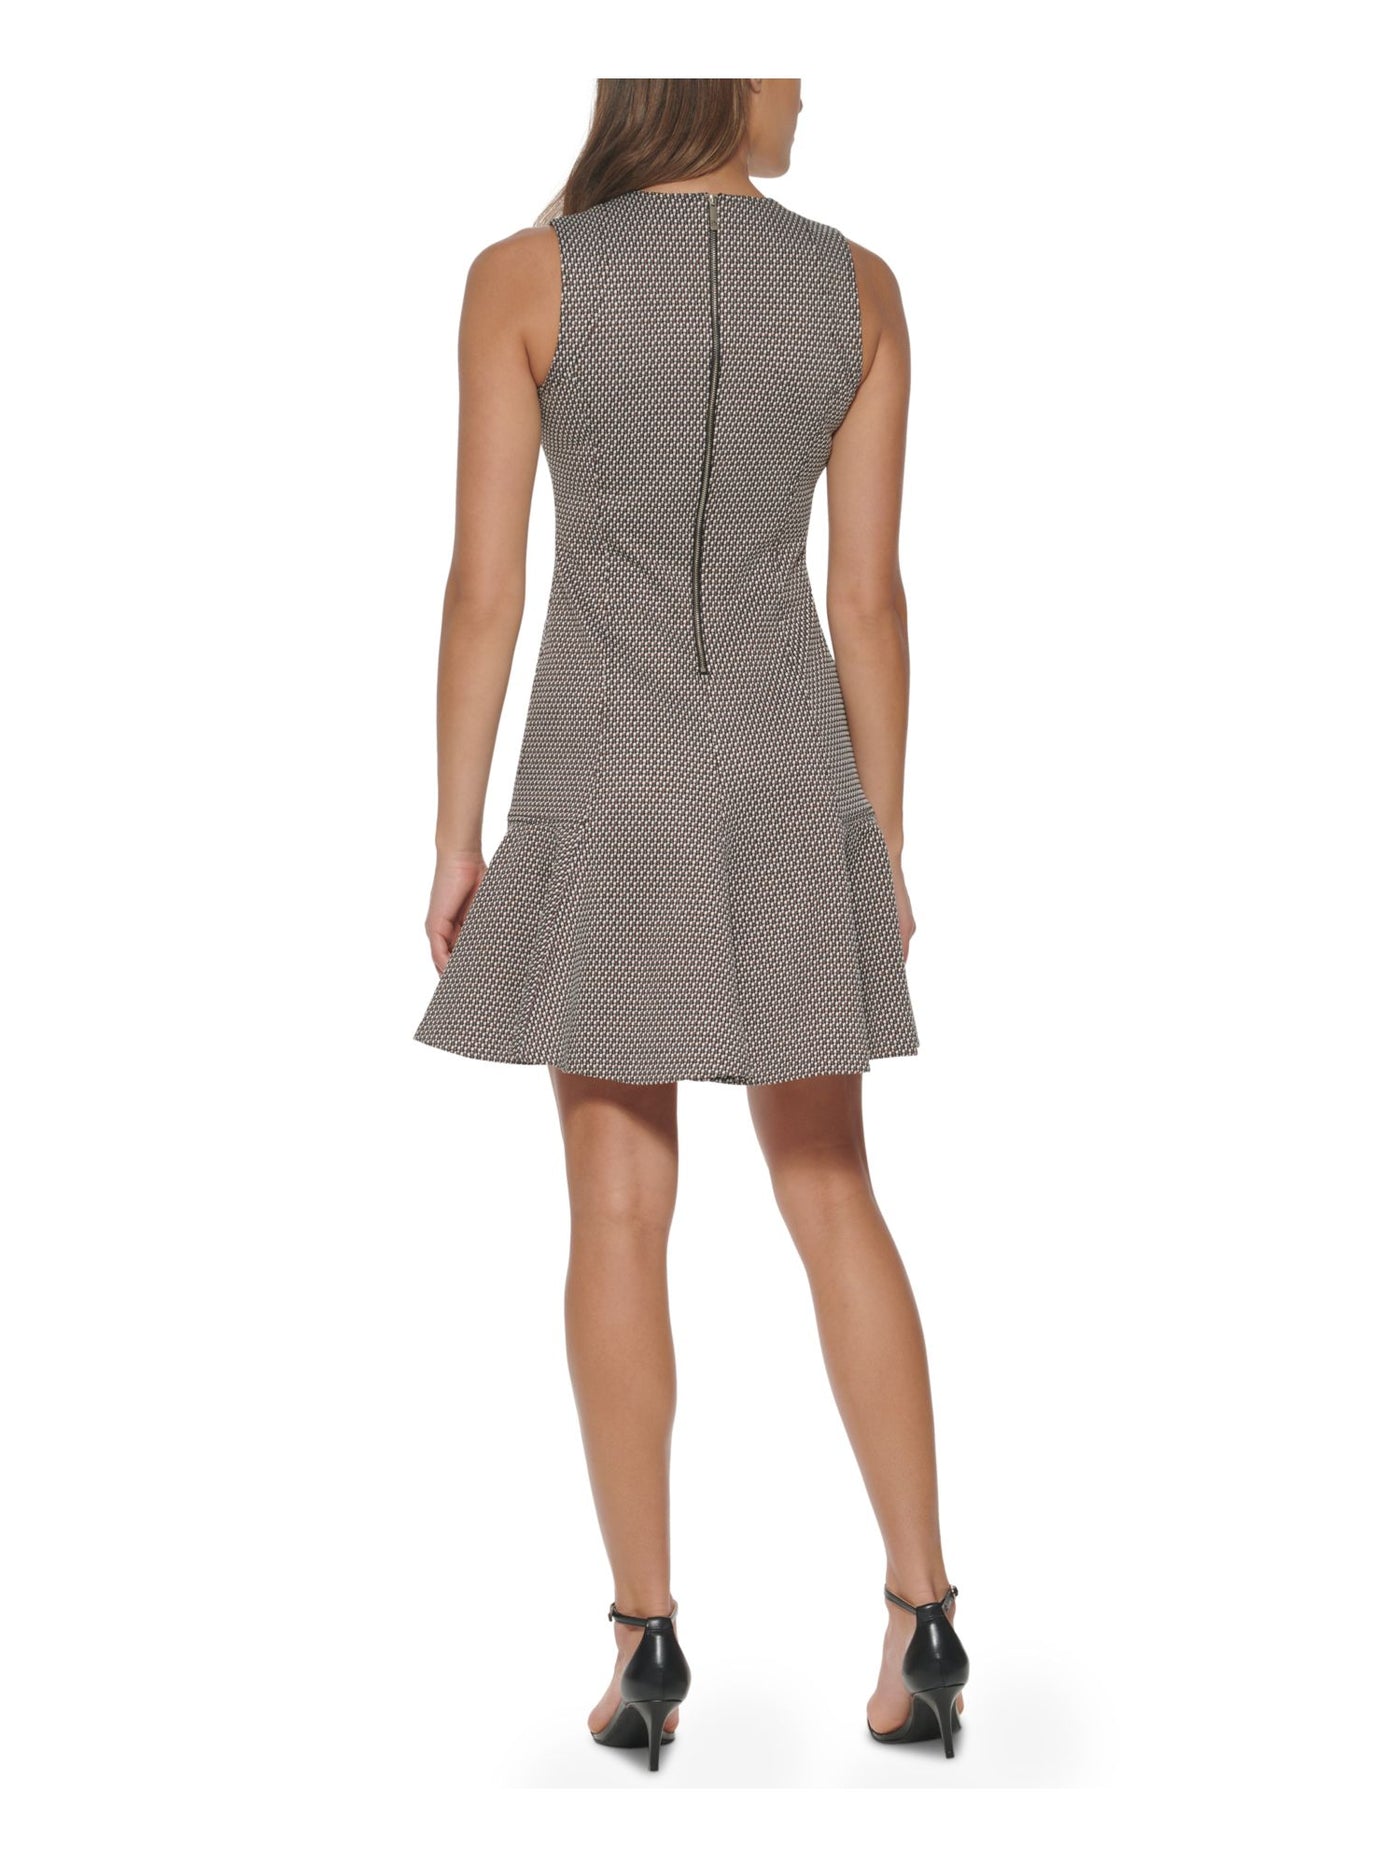 TOMMY HILFIGER Womens Zippered Unlined Sleeveless Crew Neck Above The Knee Wear To Work Fit + Flare Dress